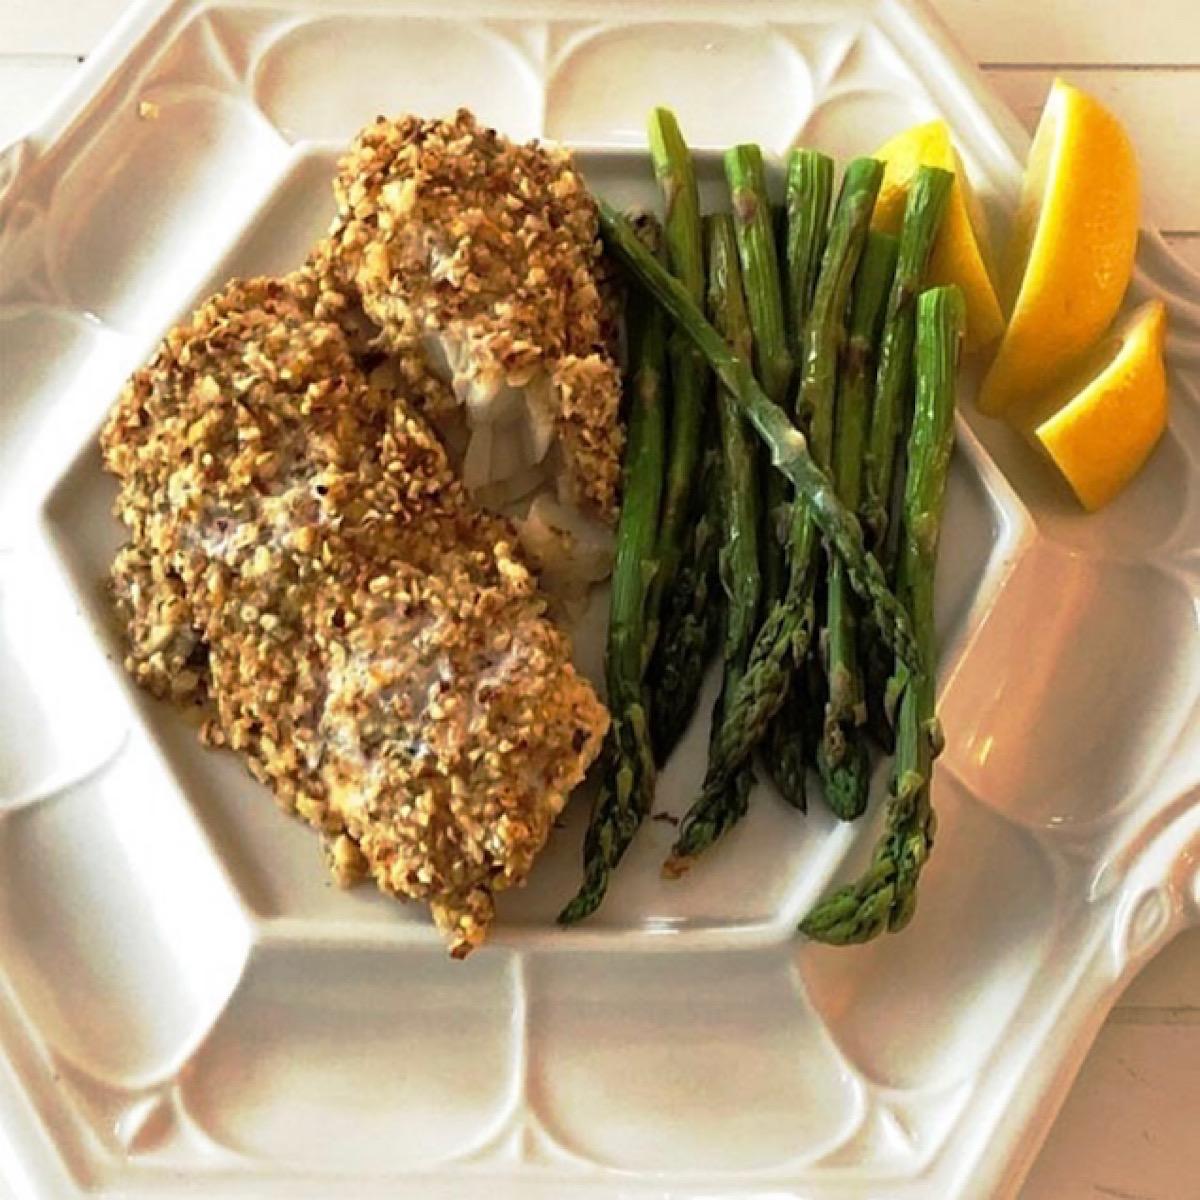 Low carb fish dinner of almond-crusted cod with asparagus spears